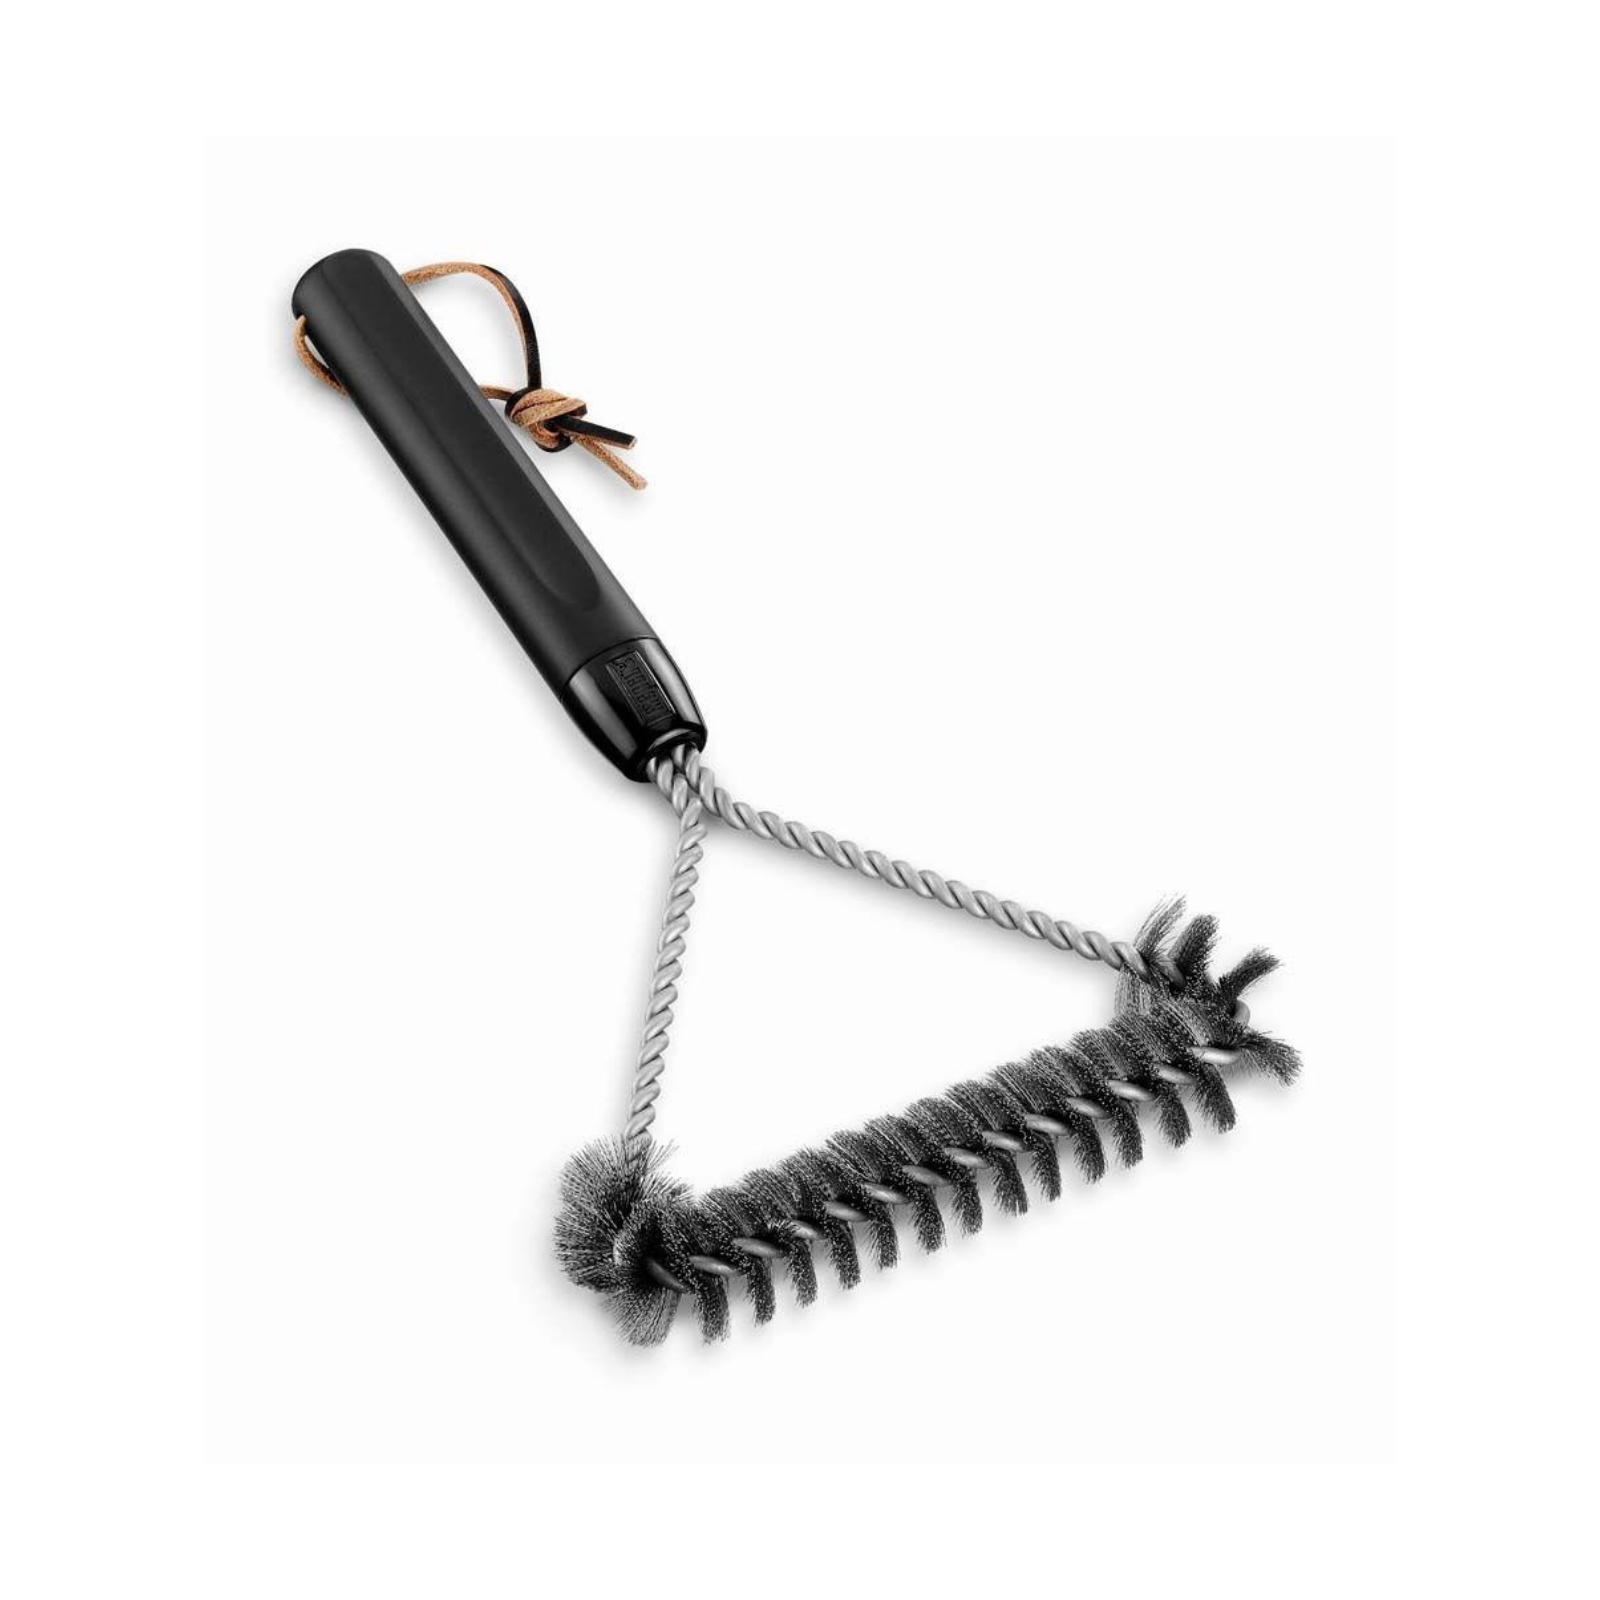 Weber 3-Sided Grill Brush (Small)